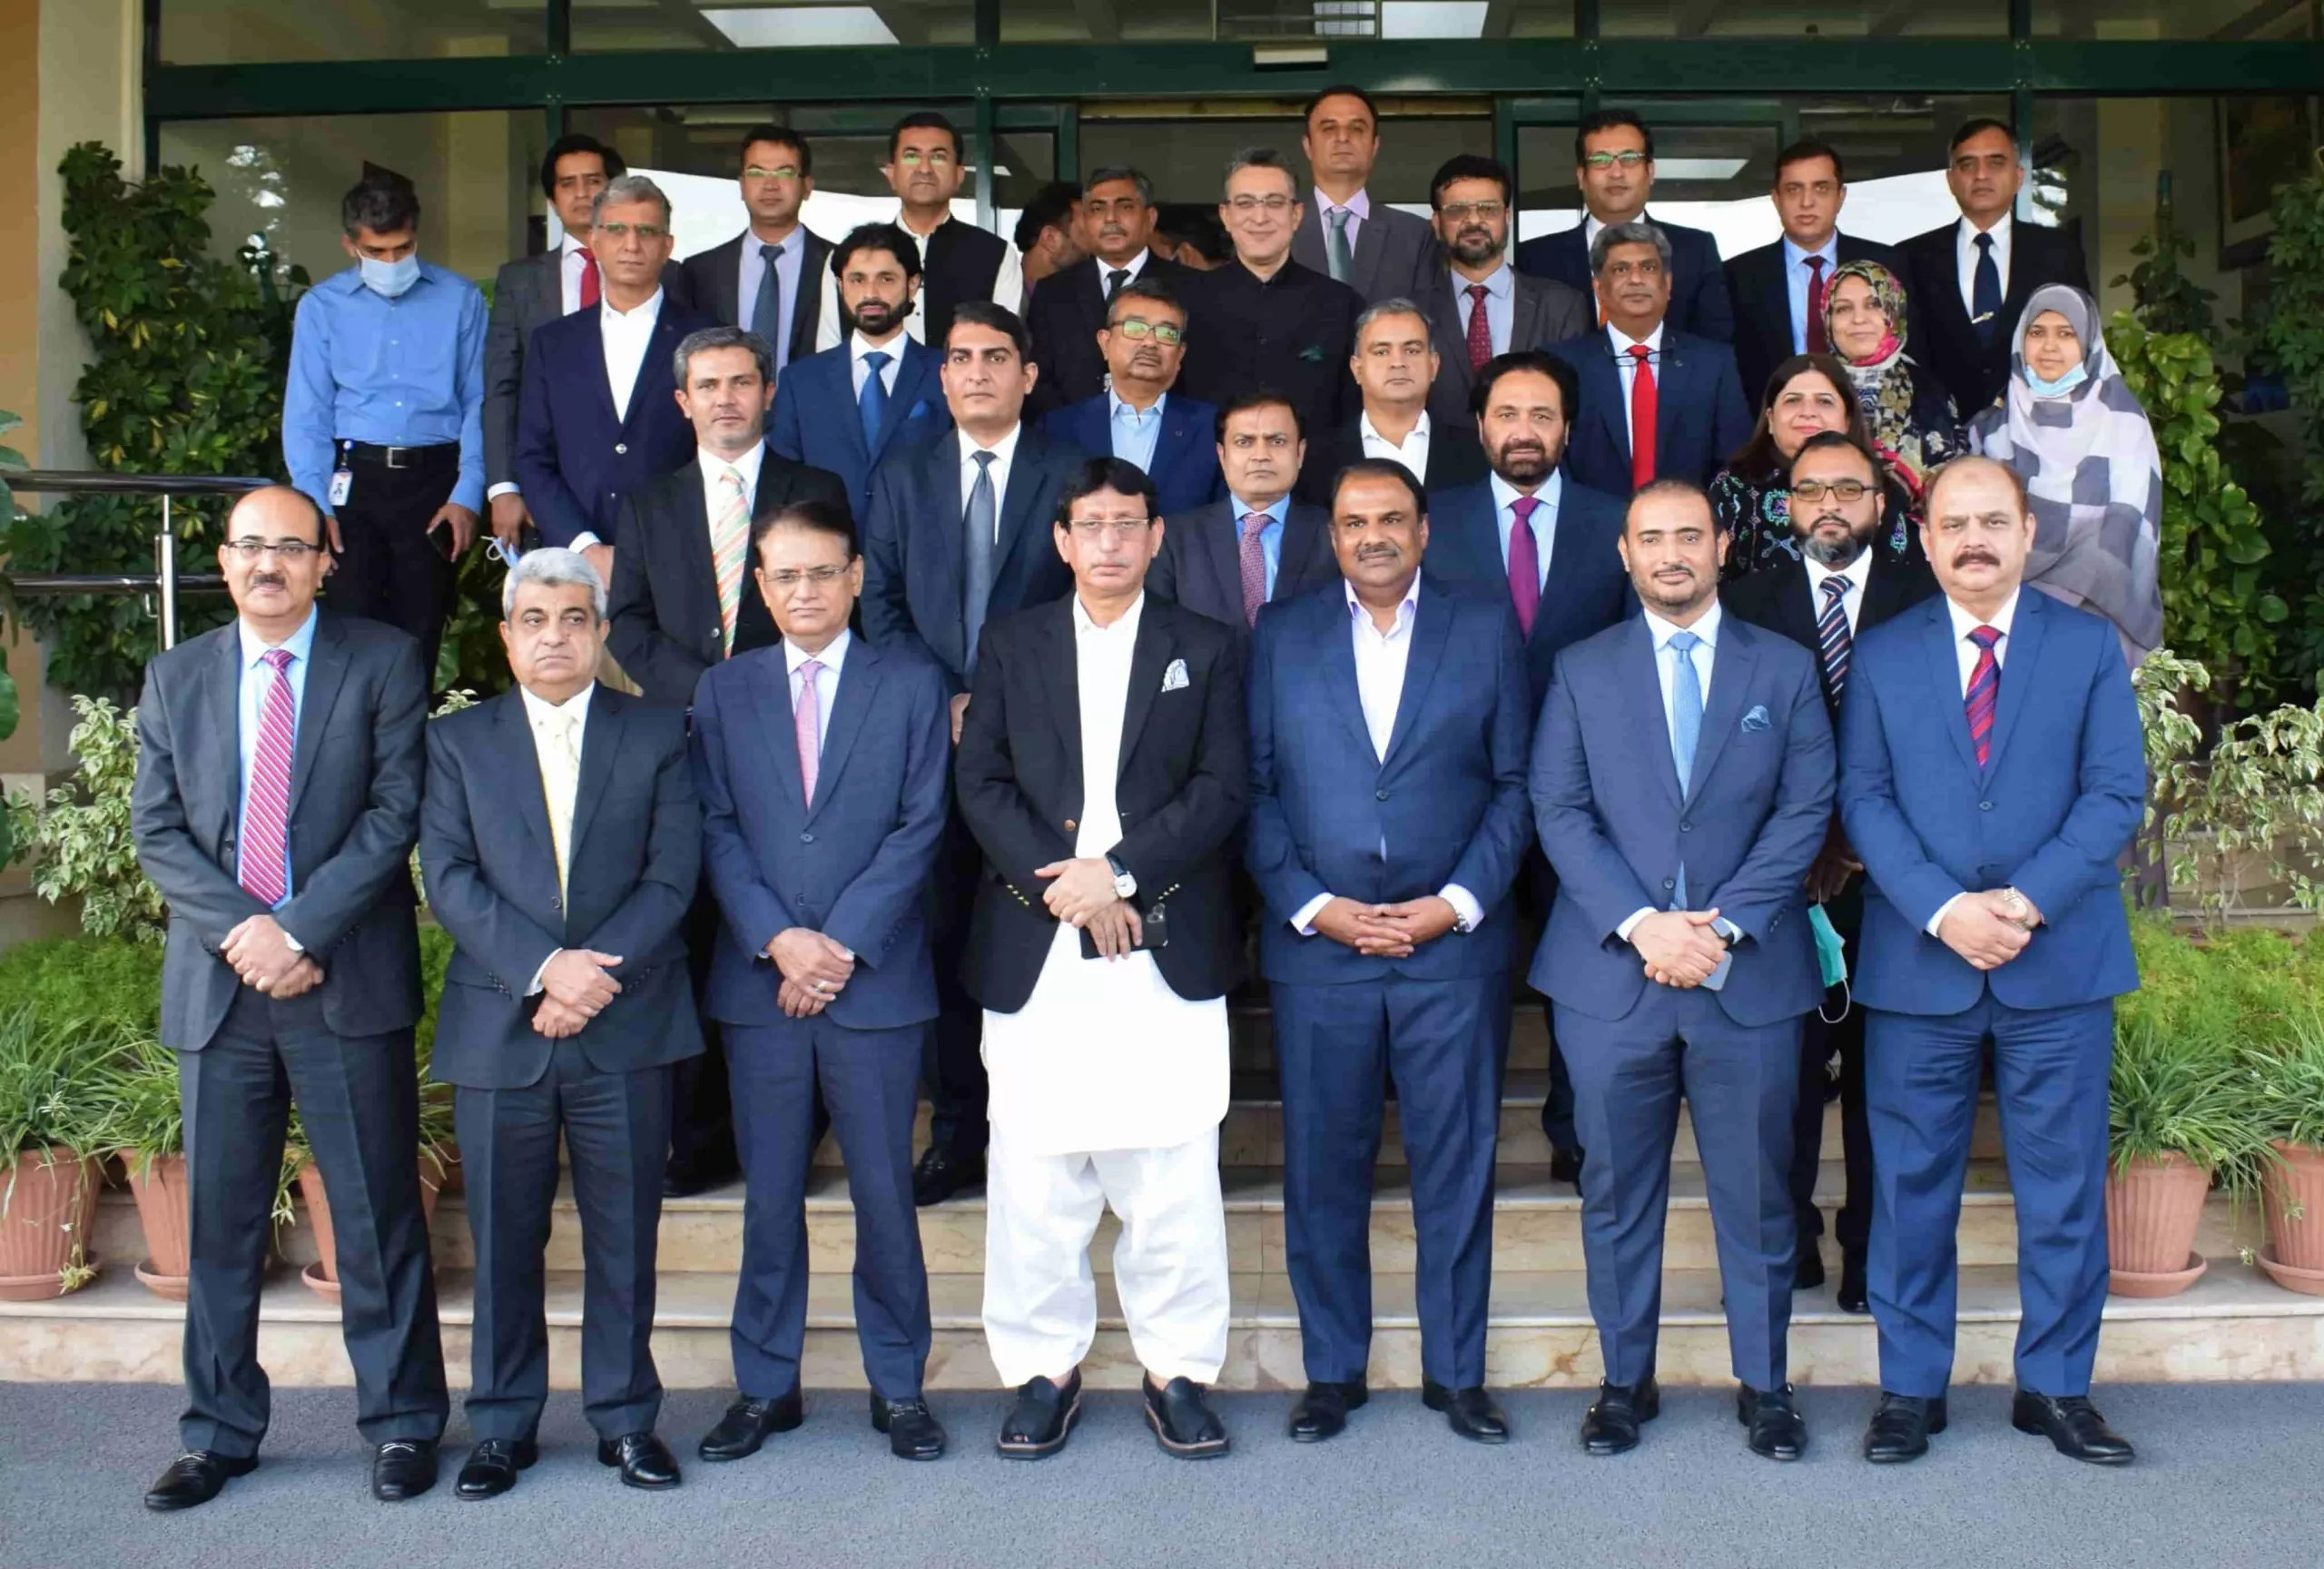 Ufone 4G spectrum licensing Ceremony group photo